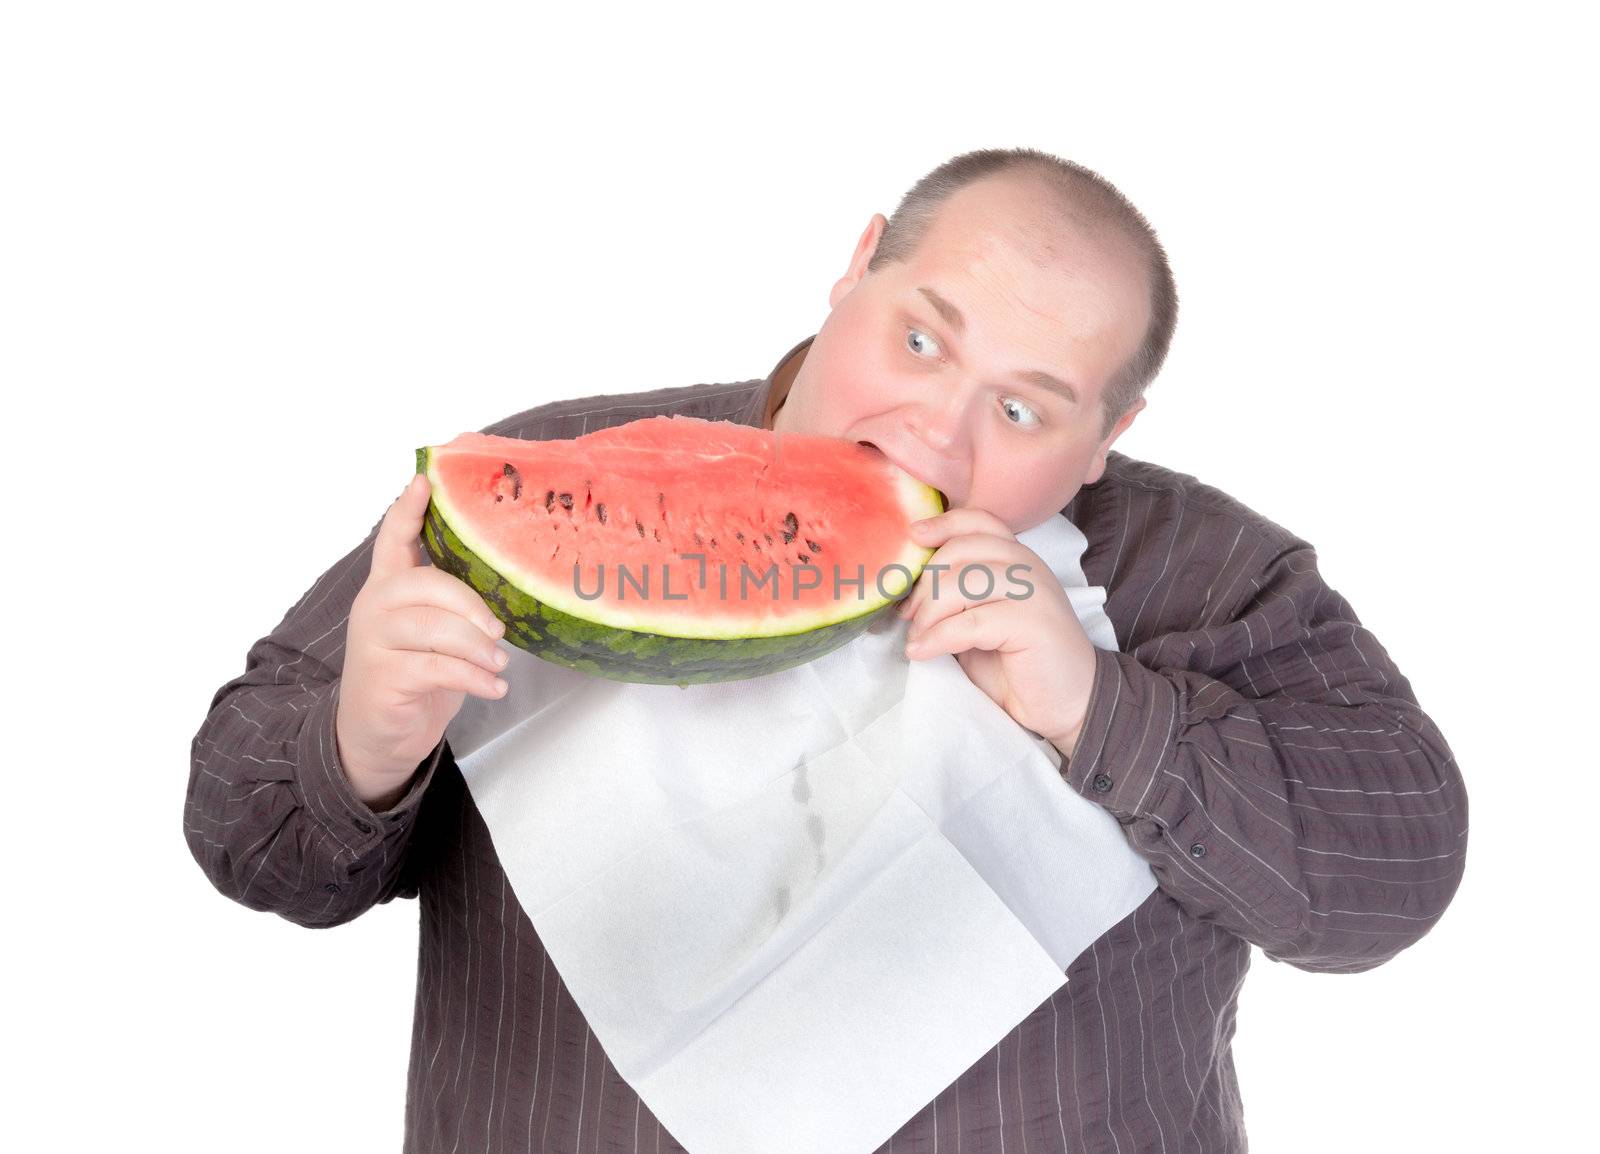 Fat man with a serviette around his neck as a bib tucking into a large slice of fresh juicy watermelon with a look of anticipation and glee isolated on white